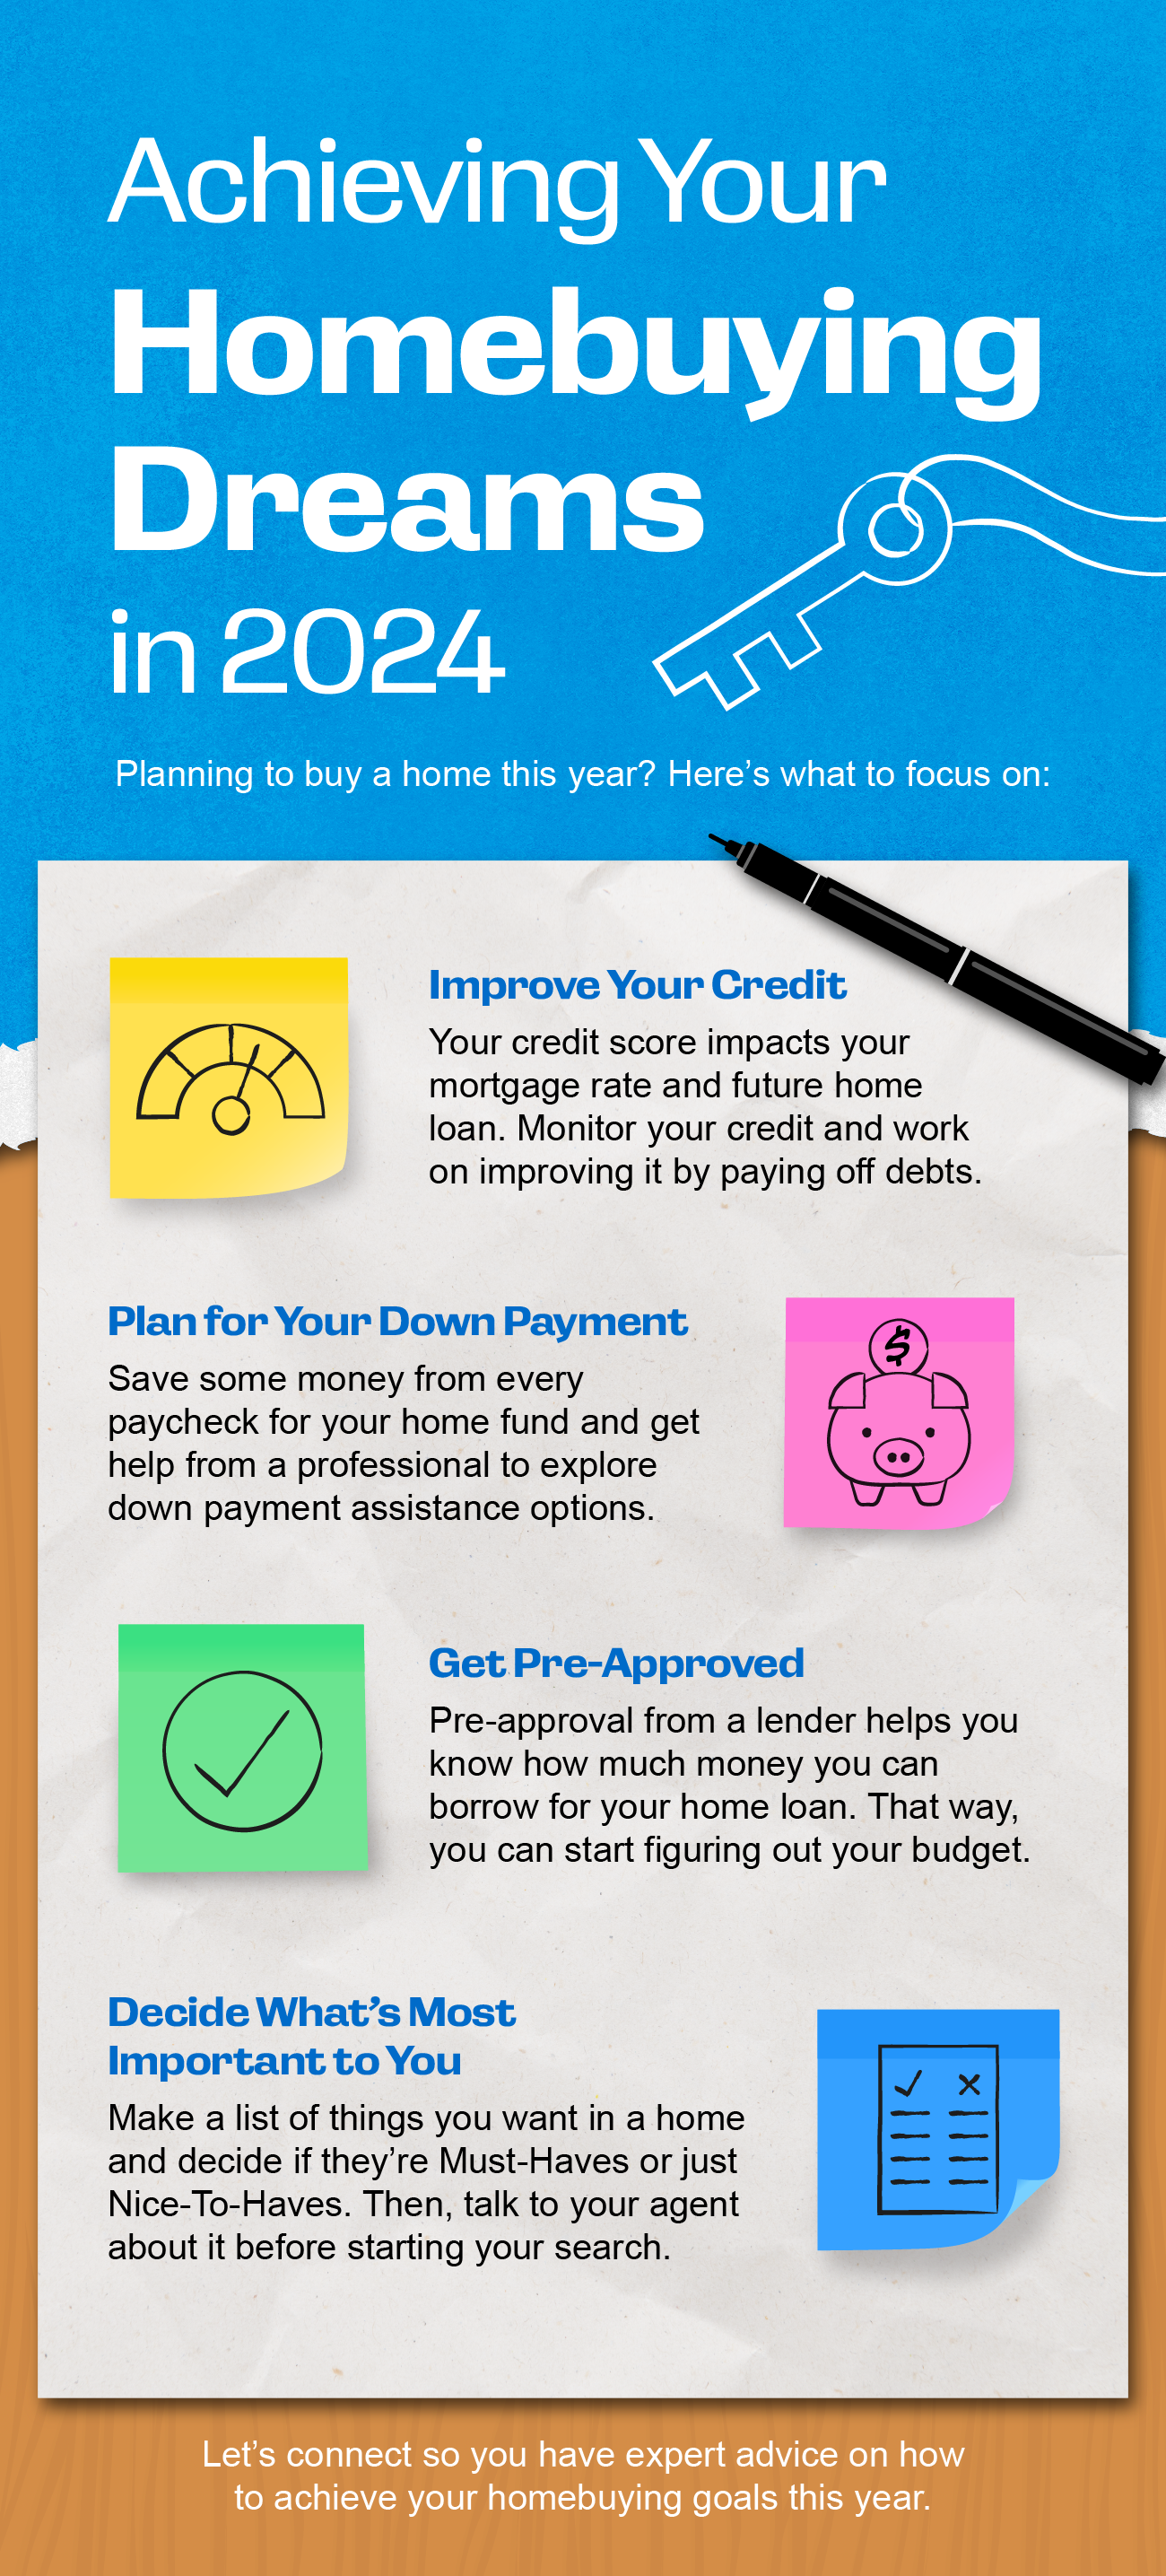 Achieving Your Homebuying Dreams in 2024 - KM Realty Infographic